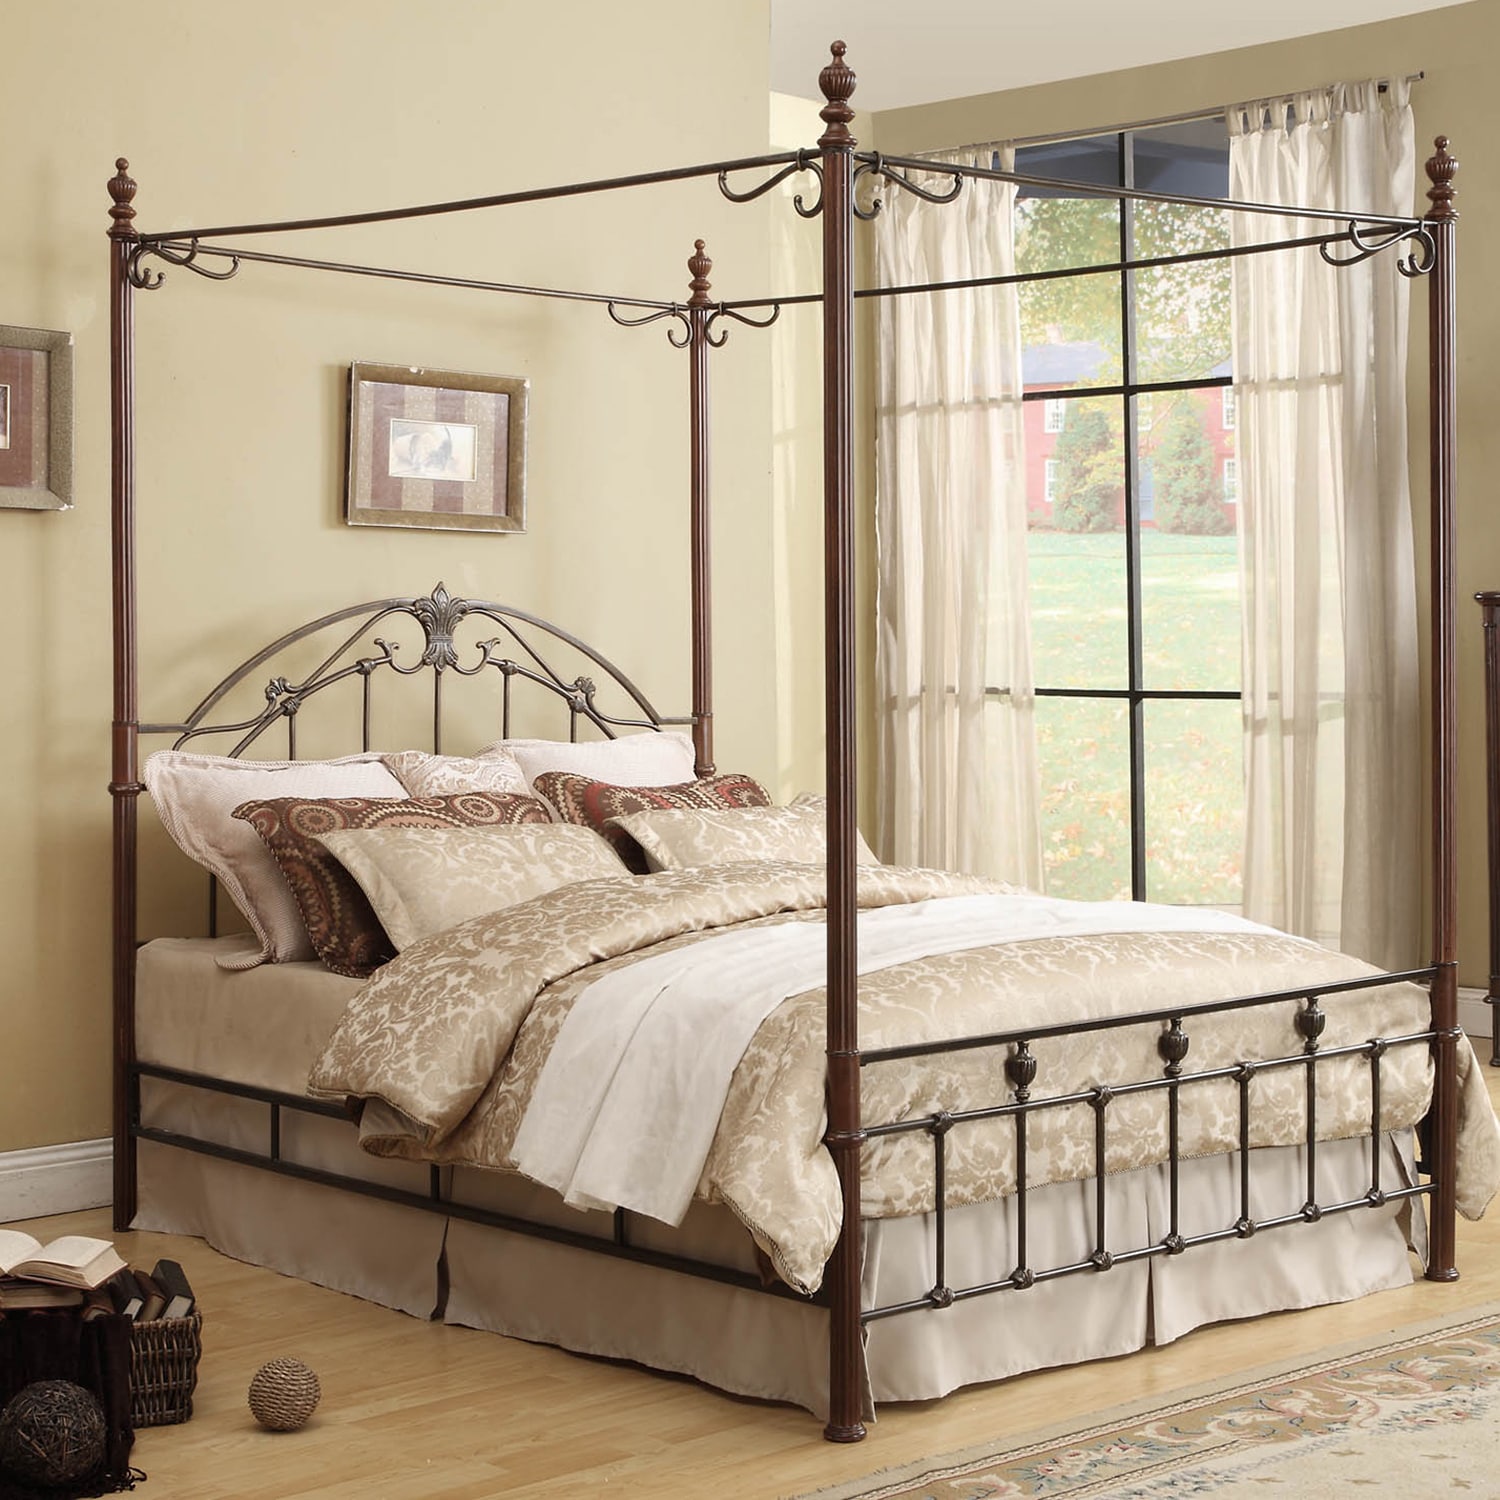 Newcastle Graceful Scroll Bronze Iron Queen Canopy Poster Bed By Inspire Q Classic